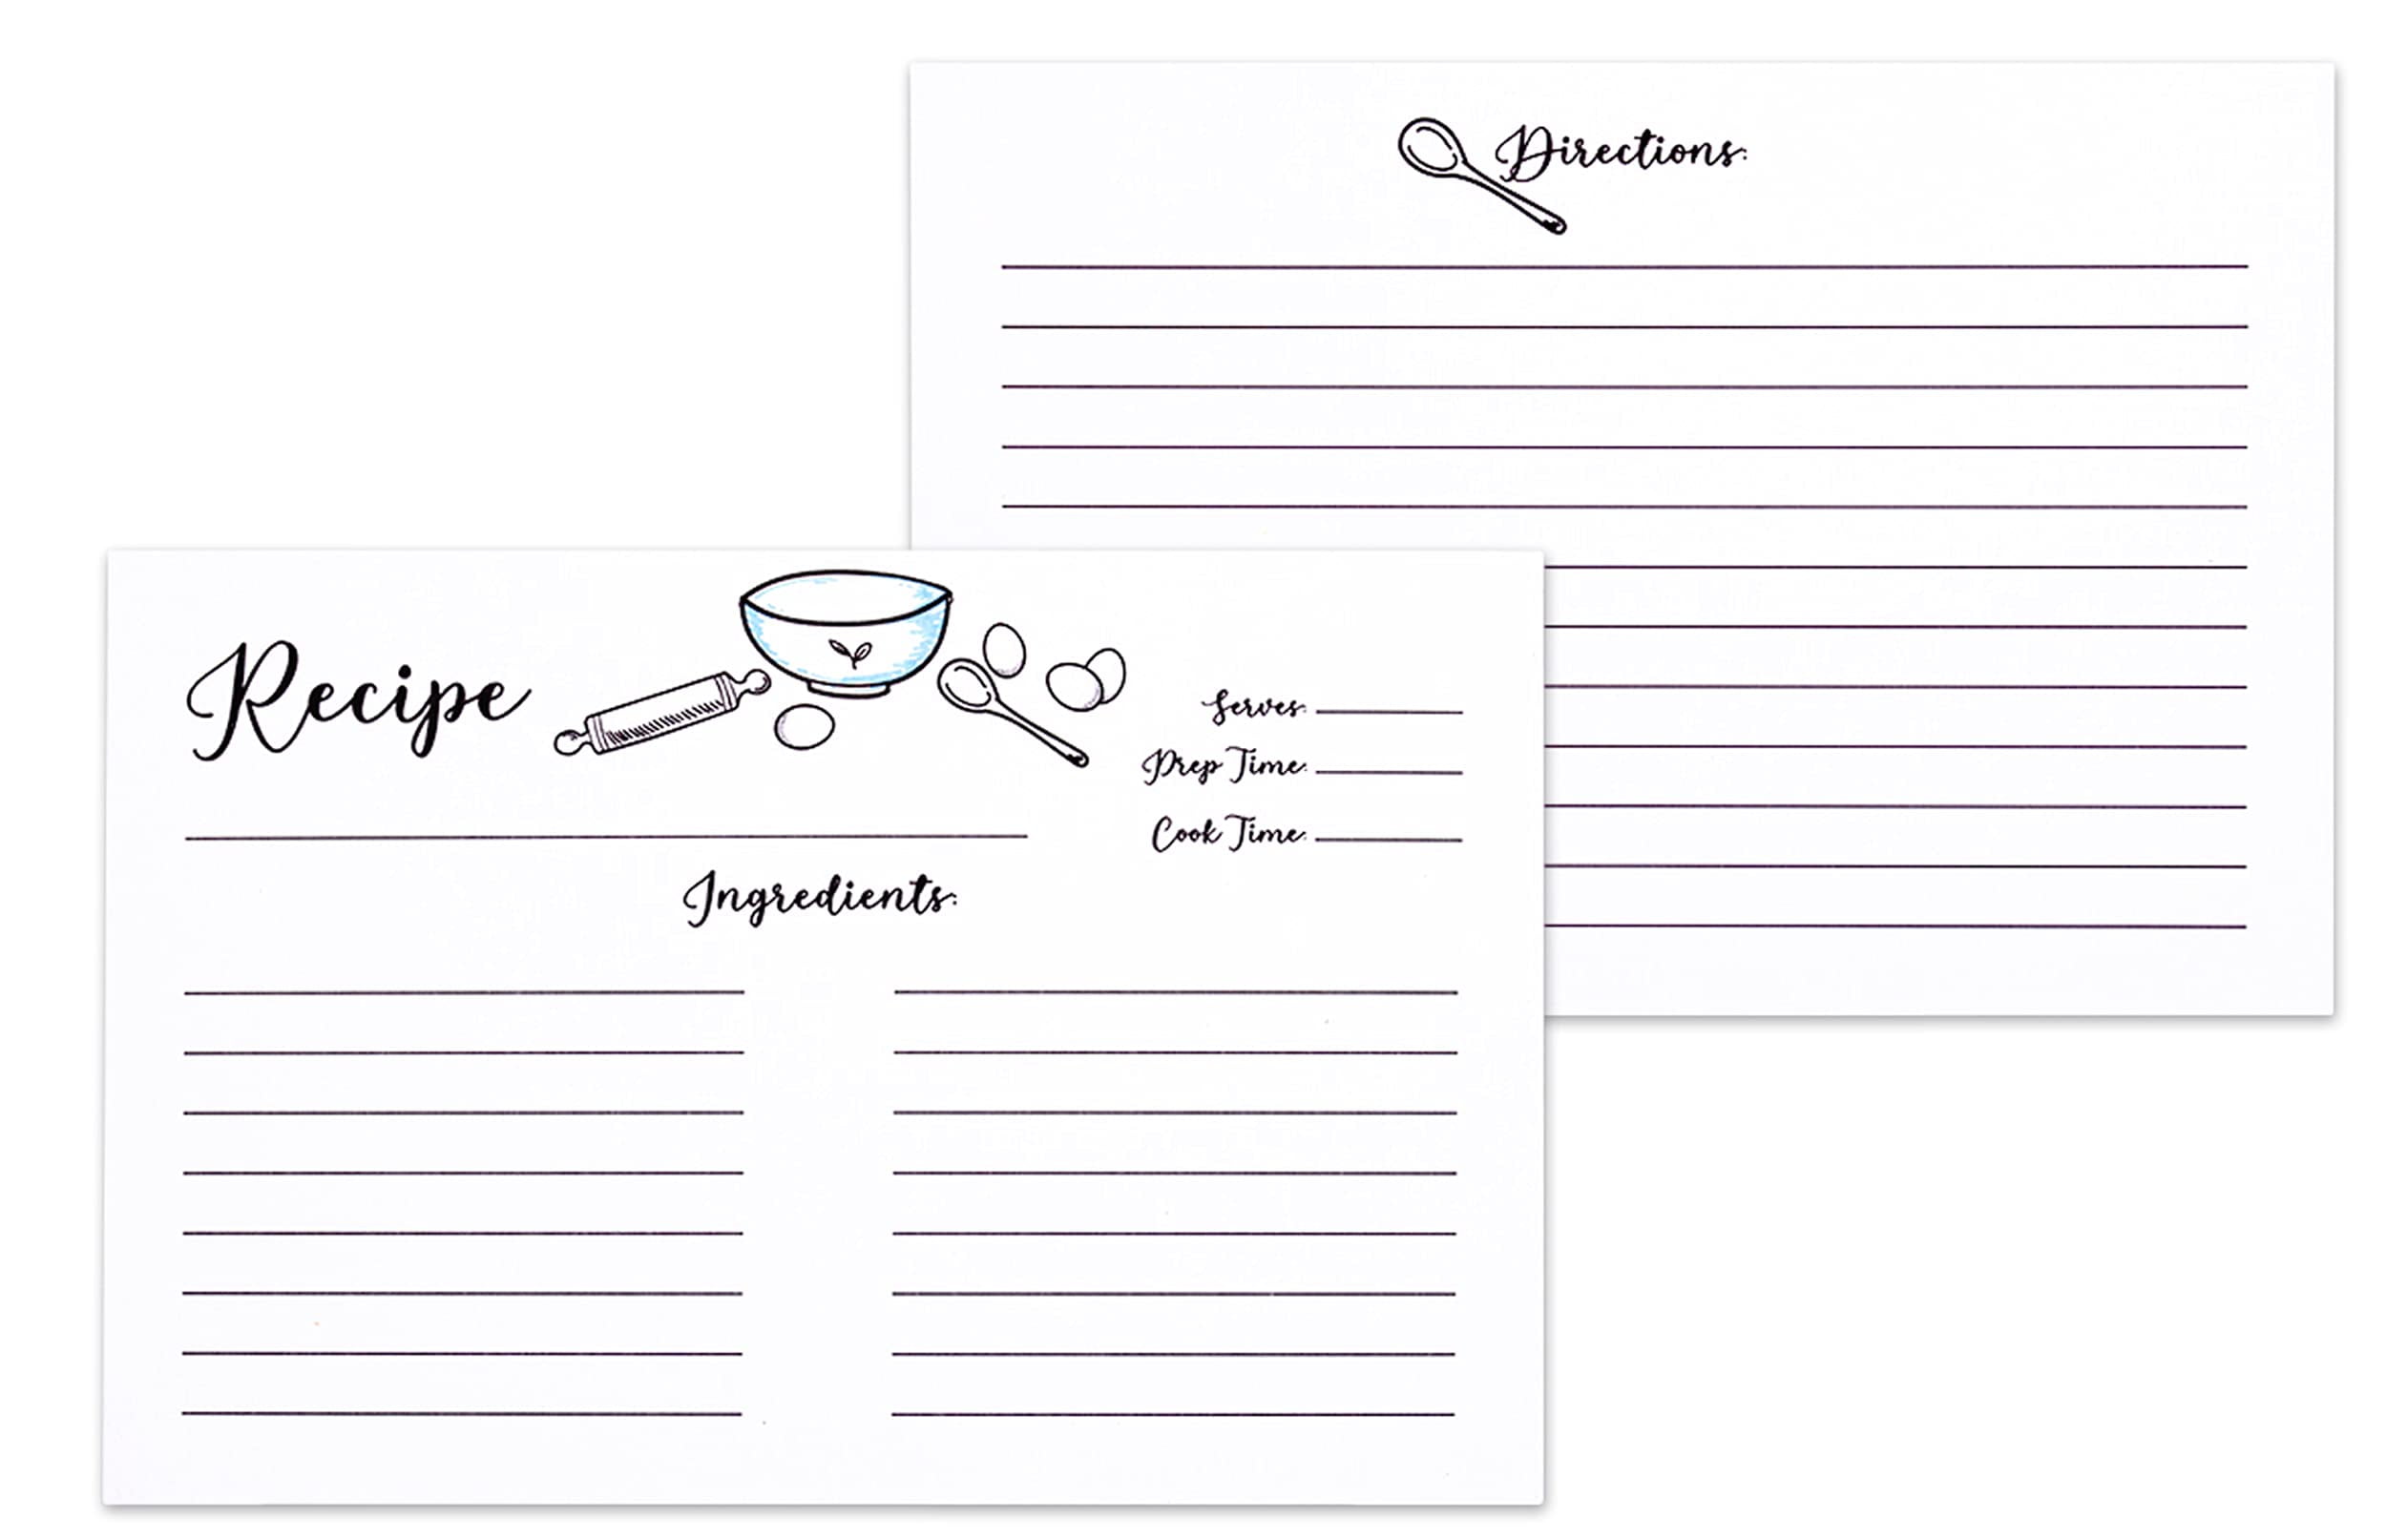 Free Note Card Templates Printable [Word, PDF] 3x5, 4x6 Inches - Ideas